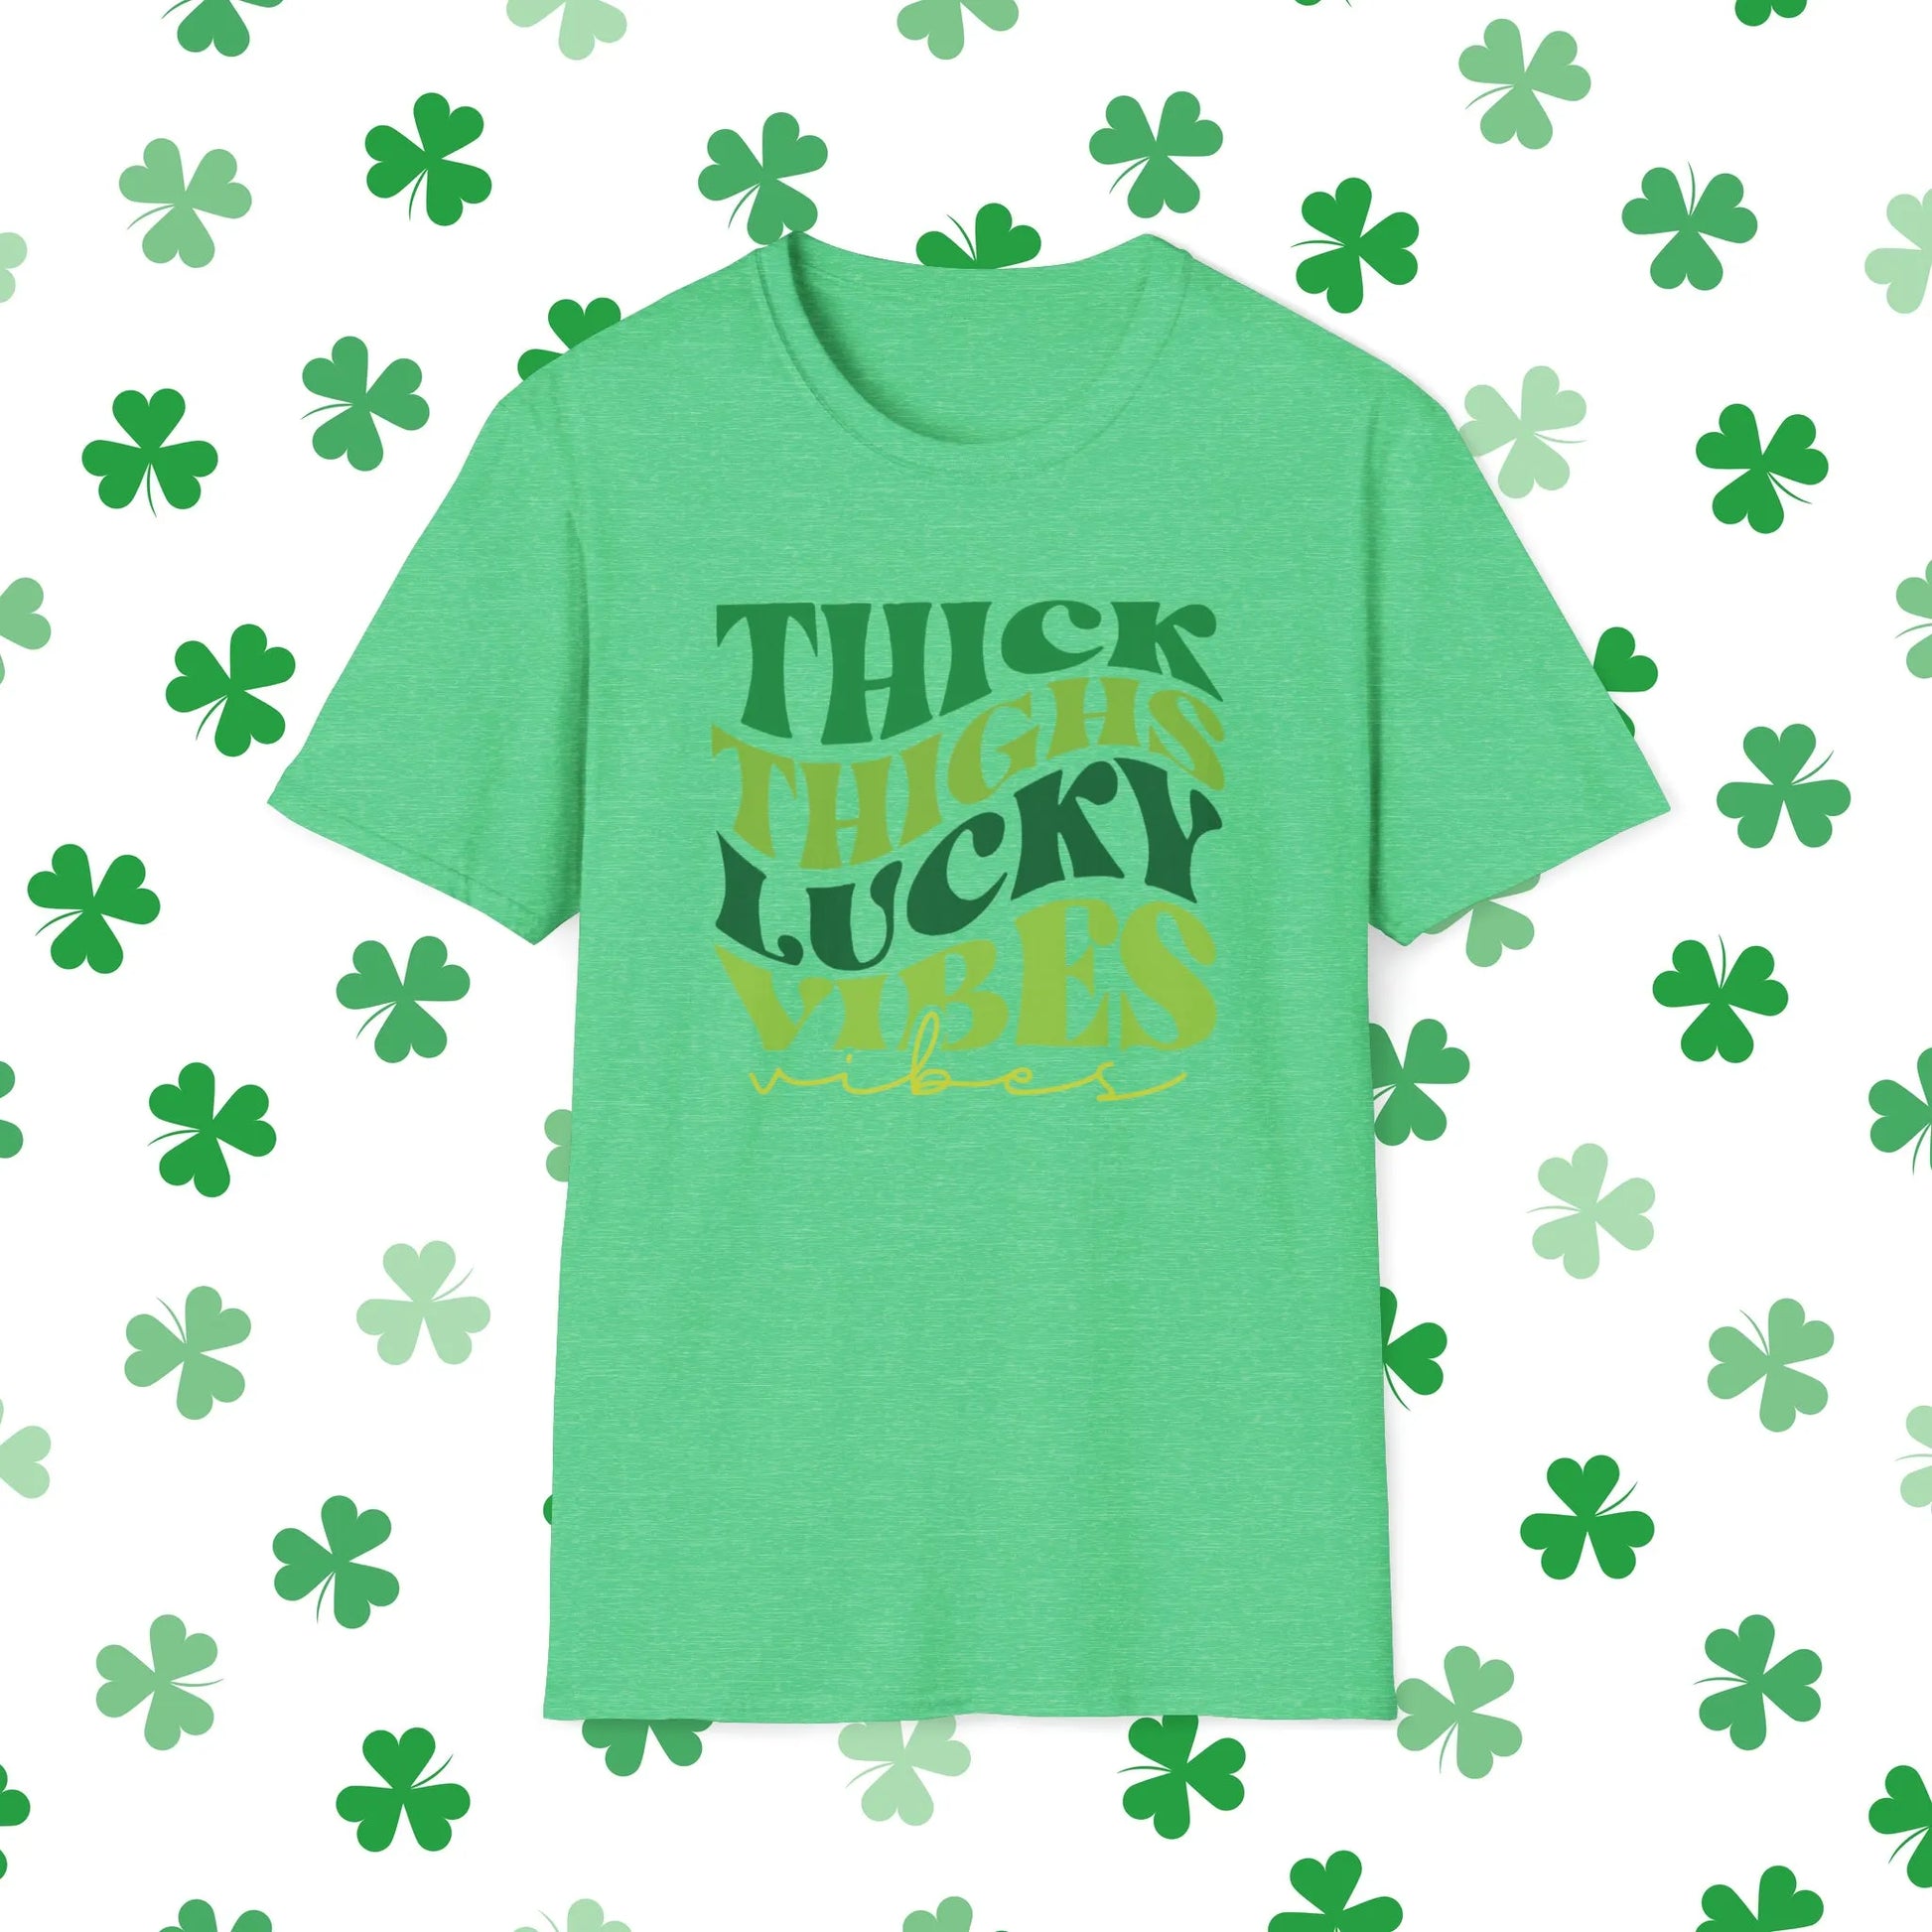 Thick Thighs Lucky Vibes Retro-Style St. Patrick's Day T-Shirt - Comfort & Charm - Thick Thighs Lucky Vibes St. Patrick's Day Shirt Green